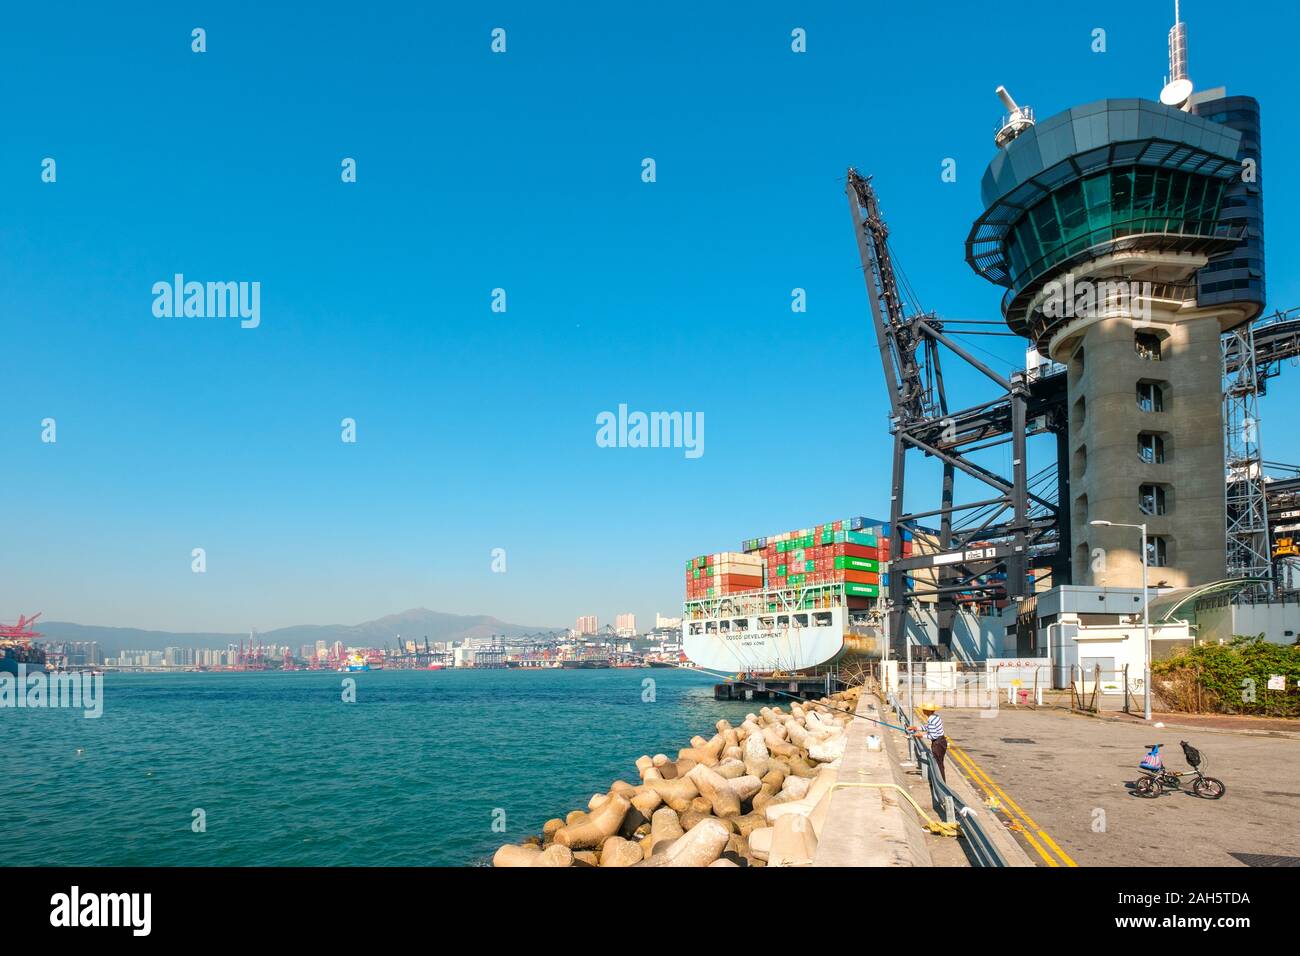 HongKong, China - November 2019: Stacked containers on container ship near freight harbour logistics centre in Hong Kong Stock Photo